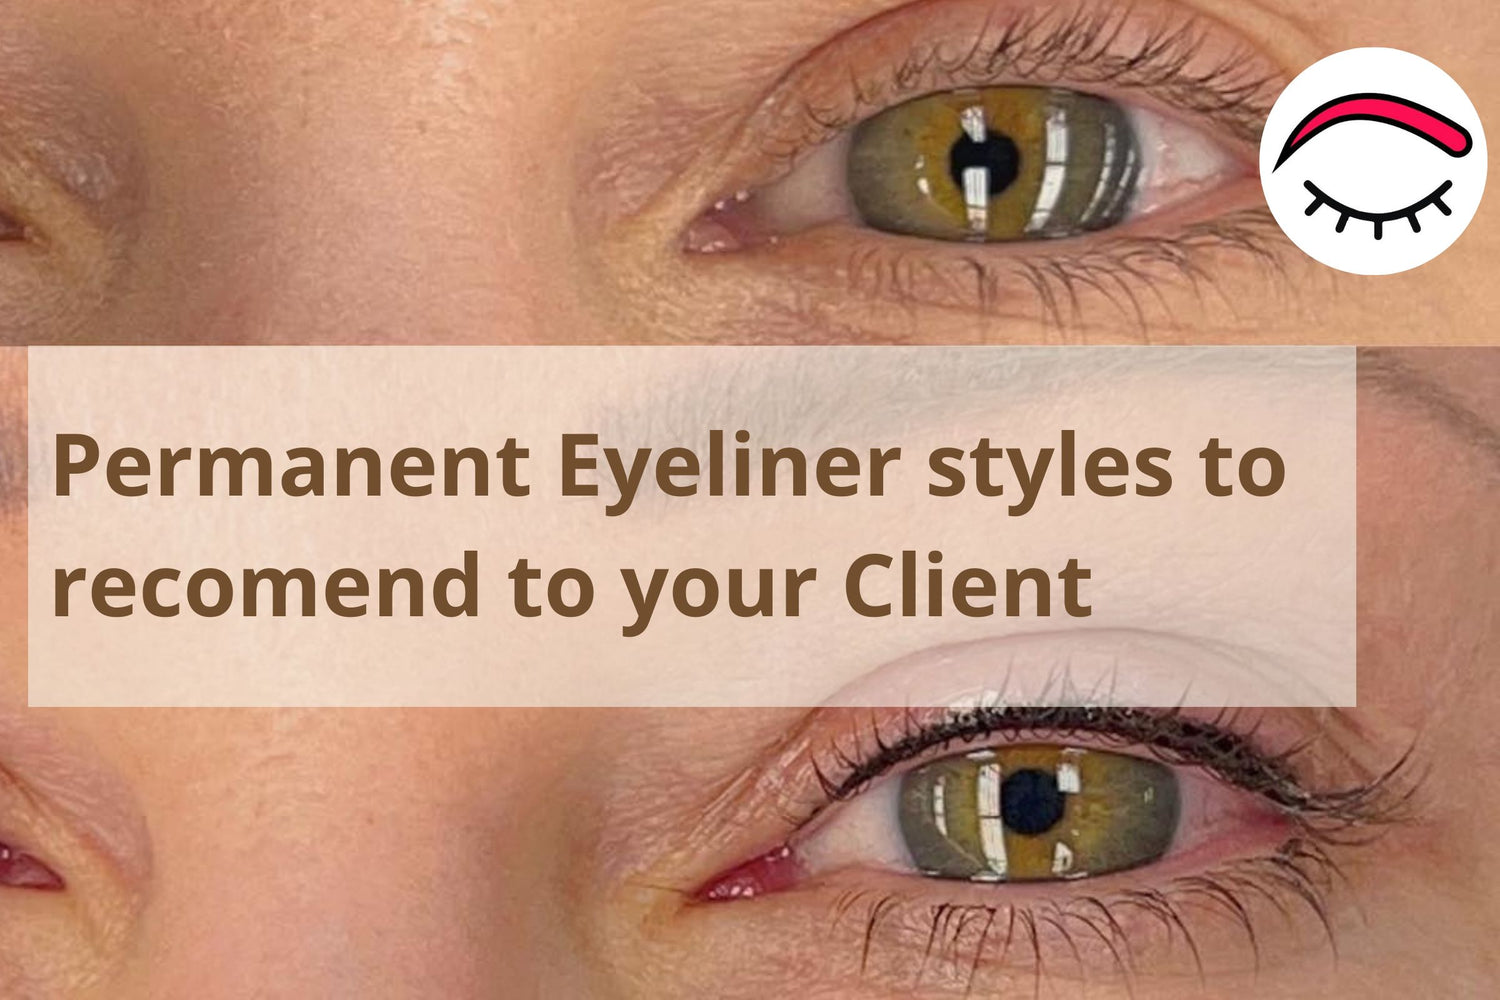 Permanent eyeliner styles to recommend to your client